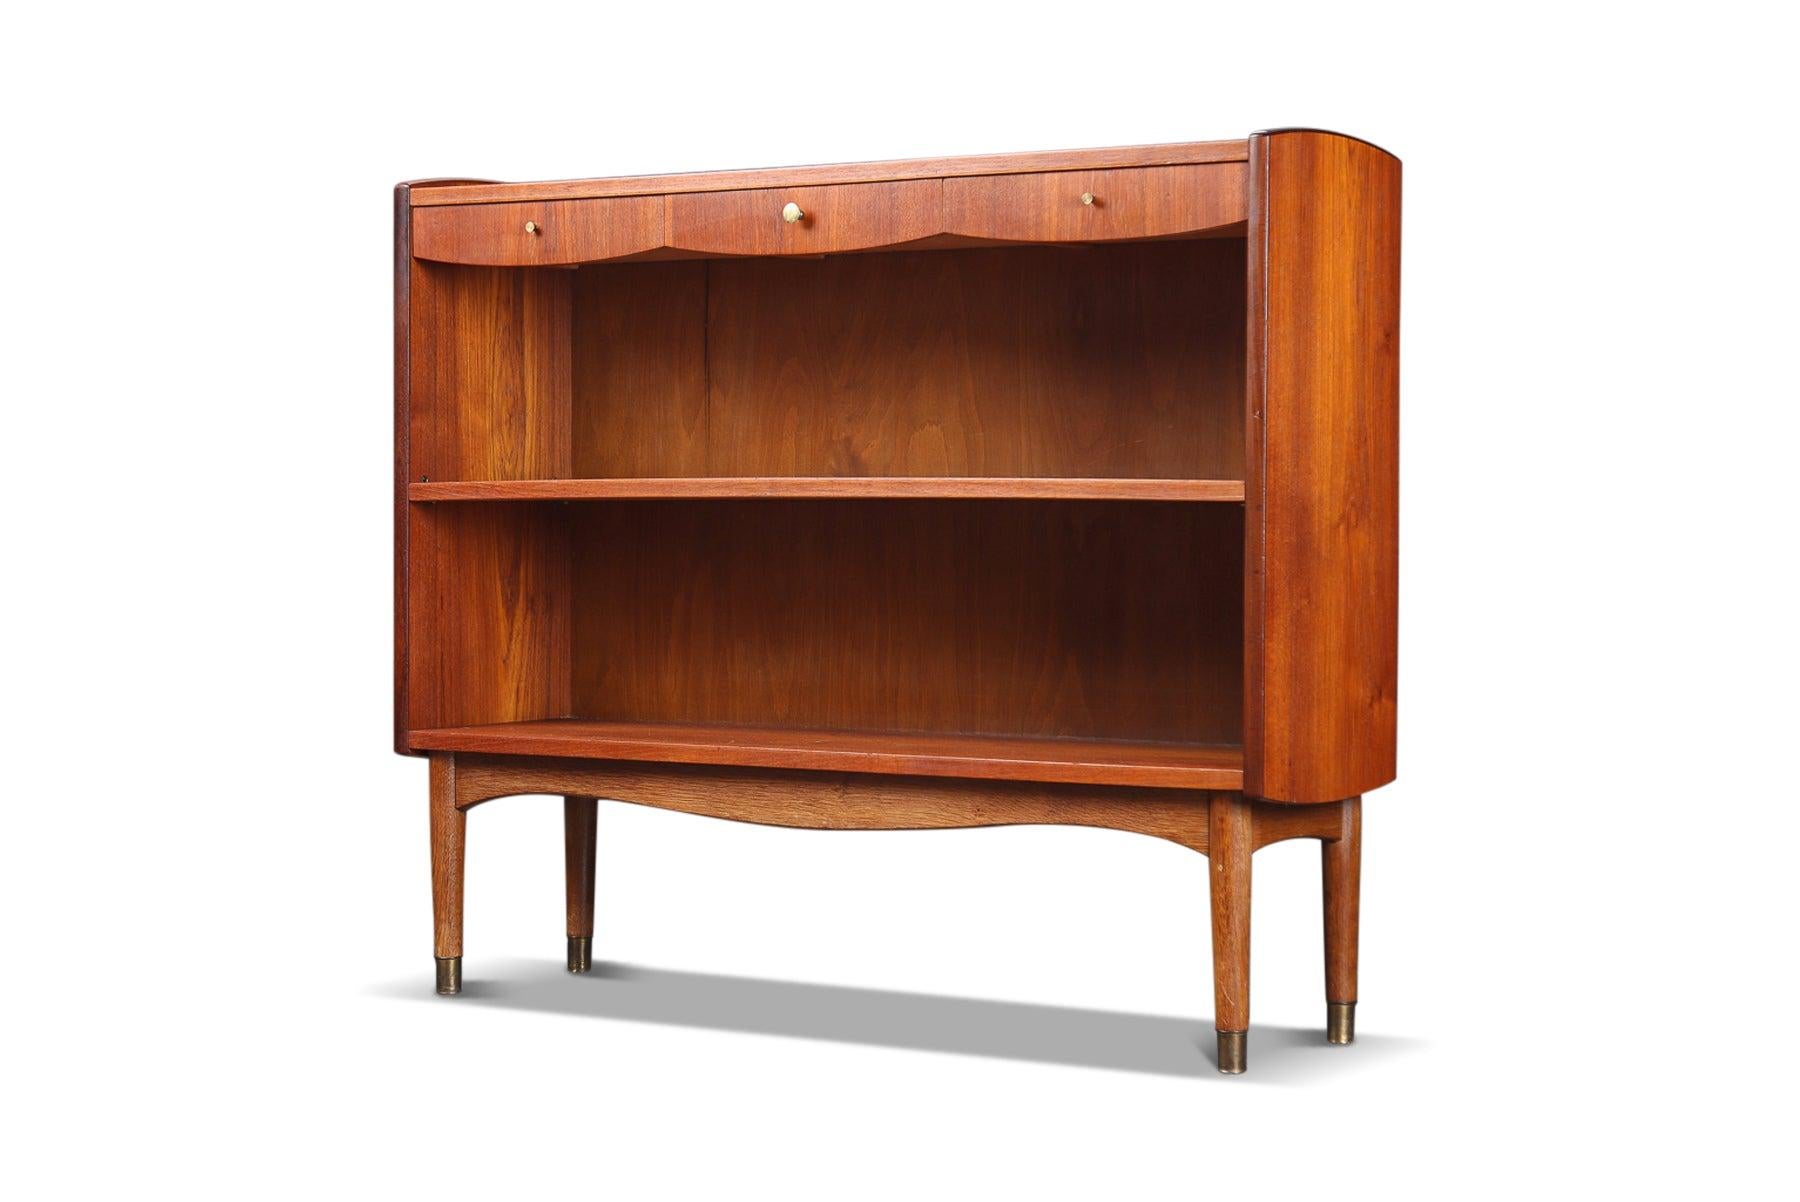 Other Narrow Danish Teak Bookcase with Dipped Drawers